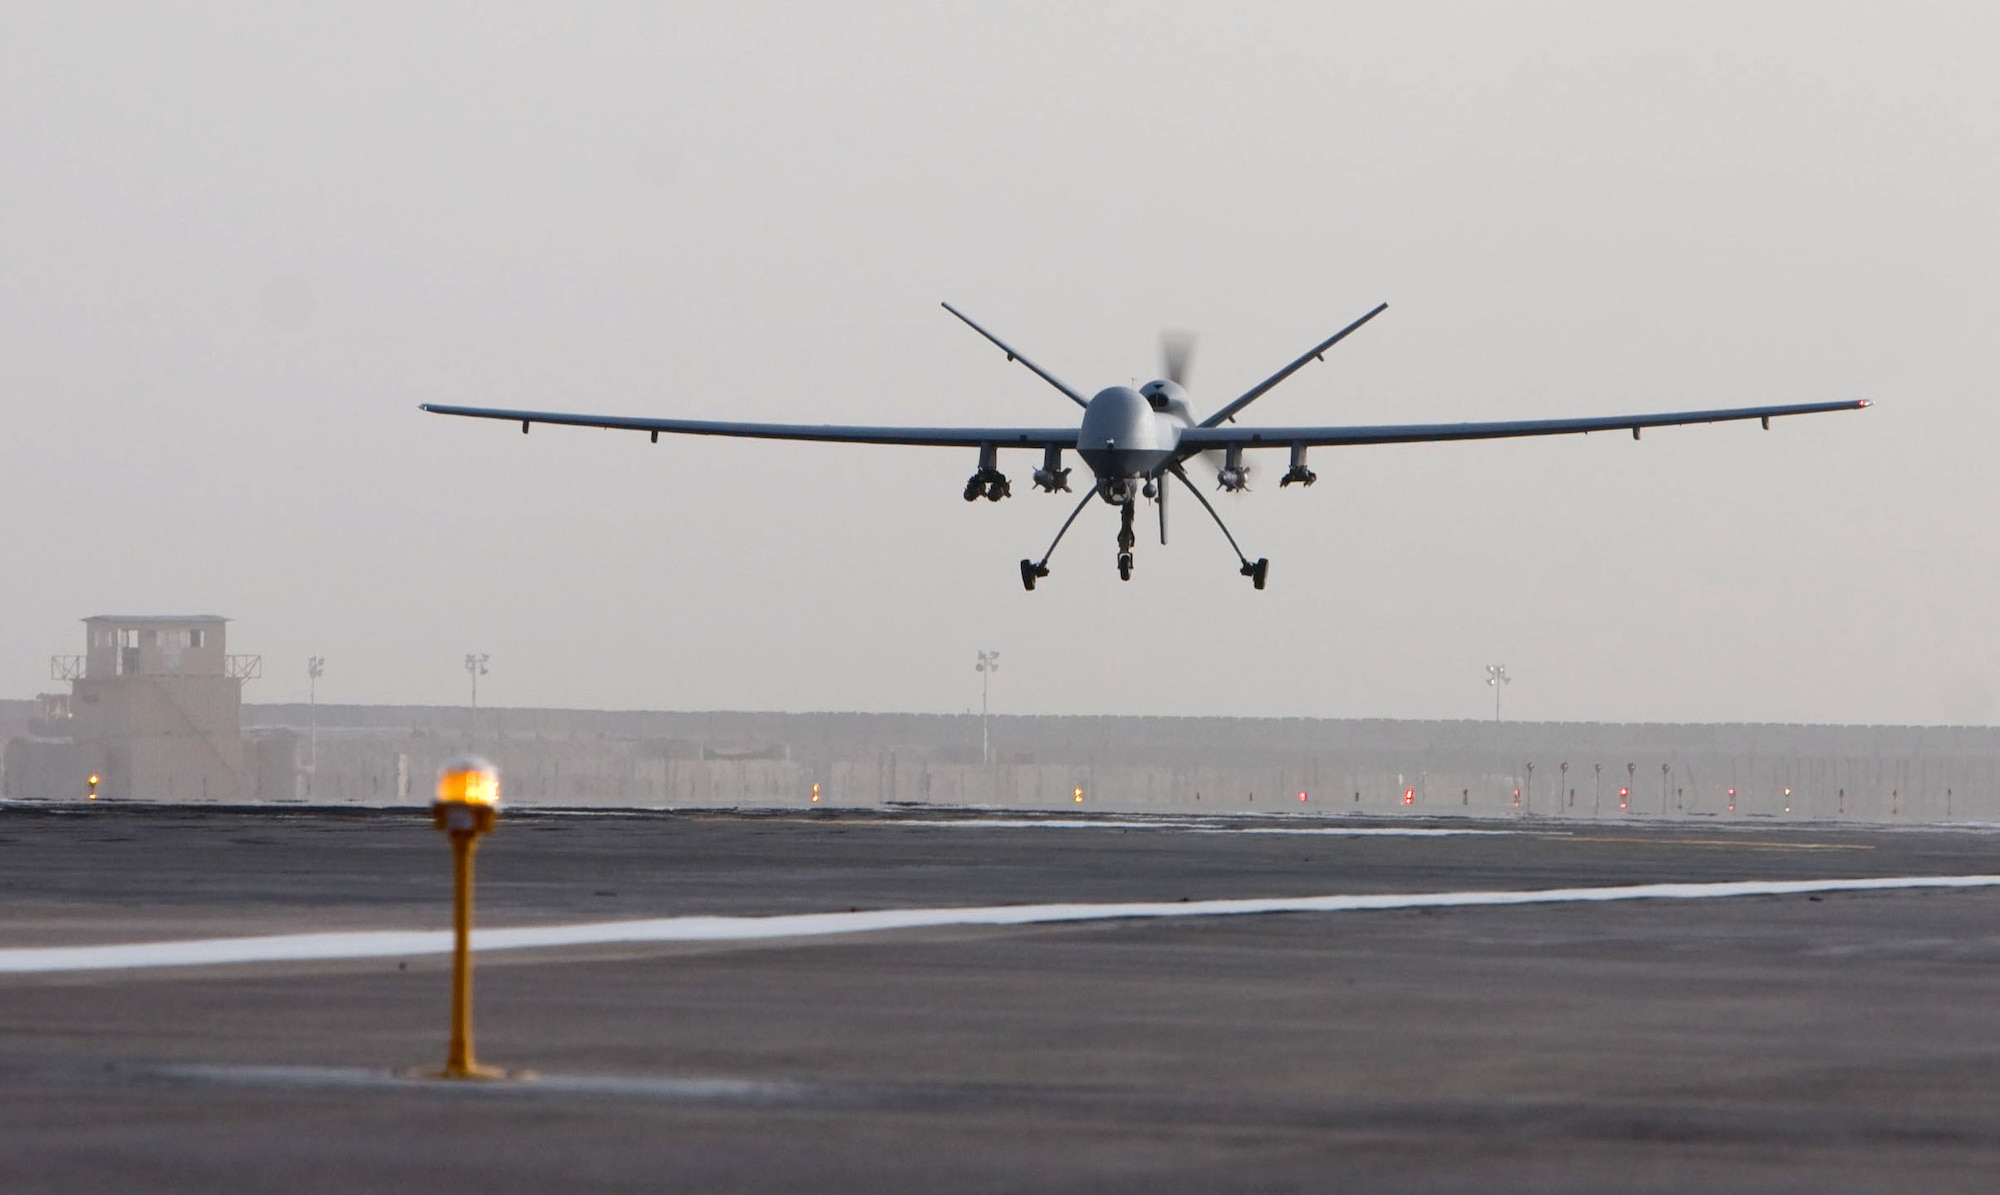 An MQ-9 Reaper takes off on a mission in Afghanistan Oct. 1. The Reaper has completed 12 missions since its inaugural flight there Sept. 25. (Courtesy photo)